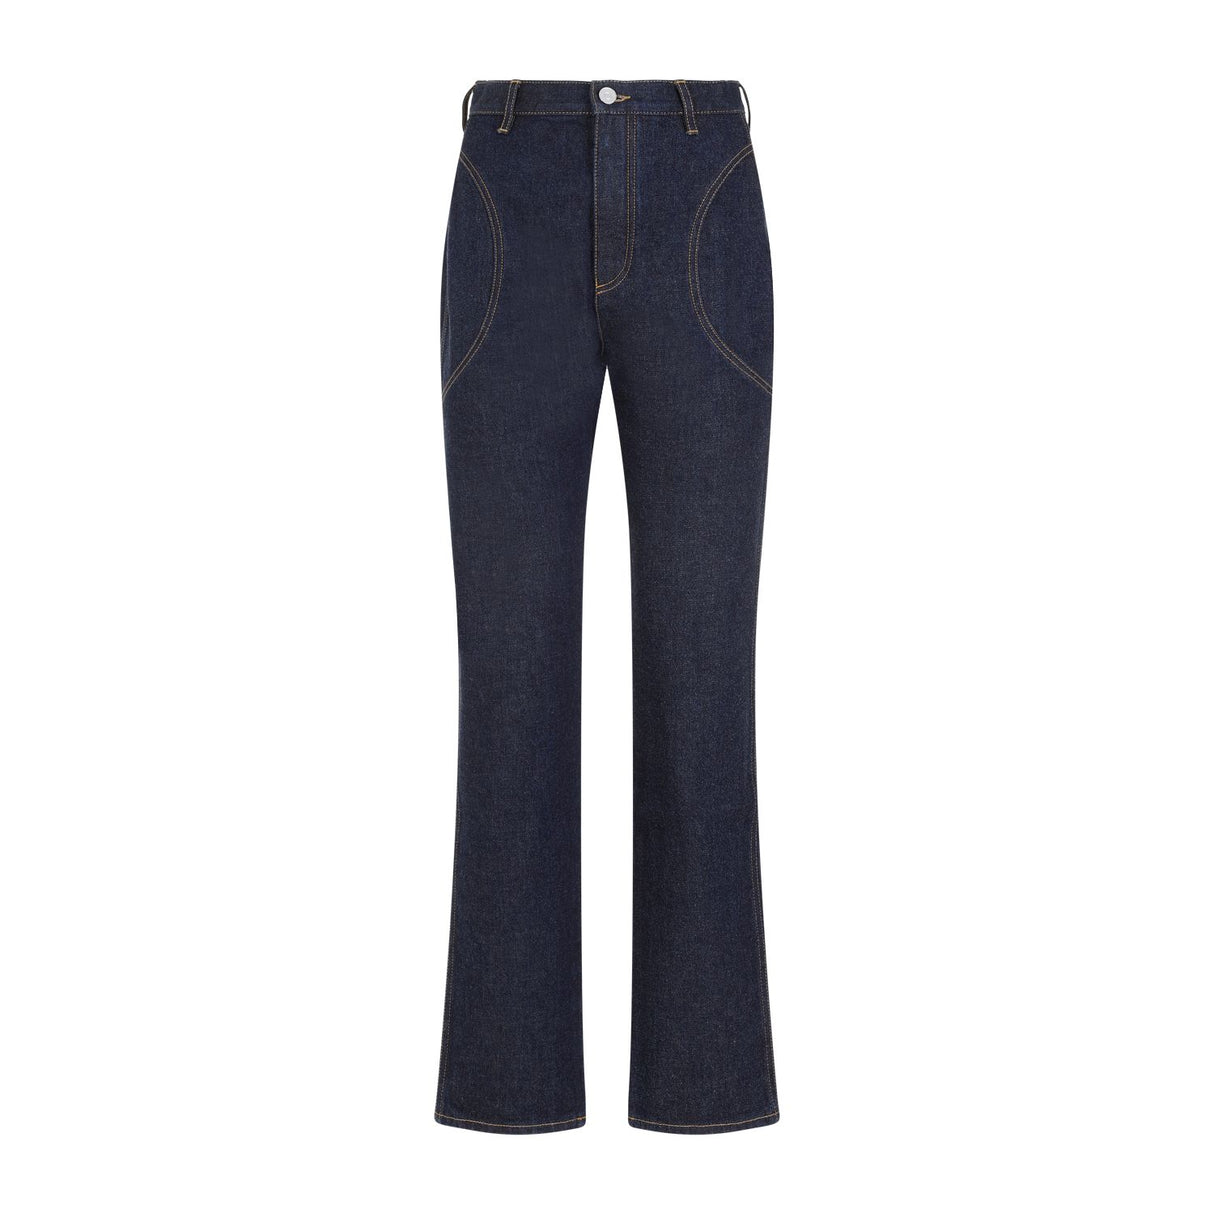 ALAIA High Waist Blue Cotton Pants for Women - Stylish and Comfortable